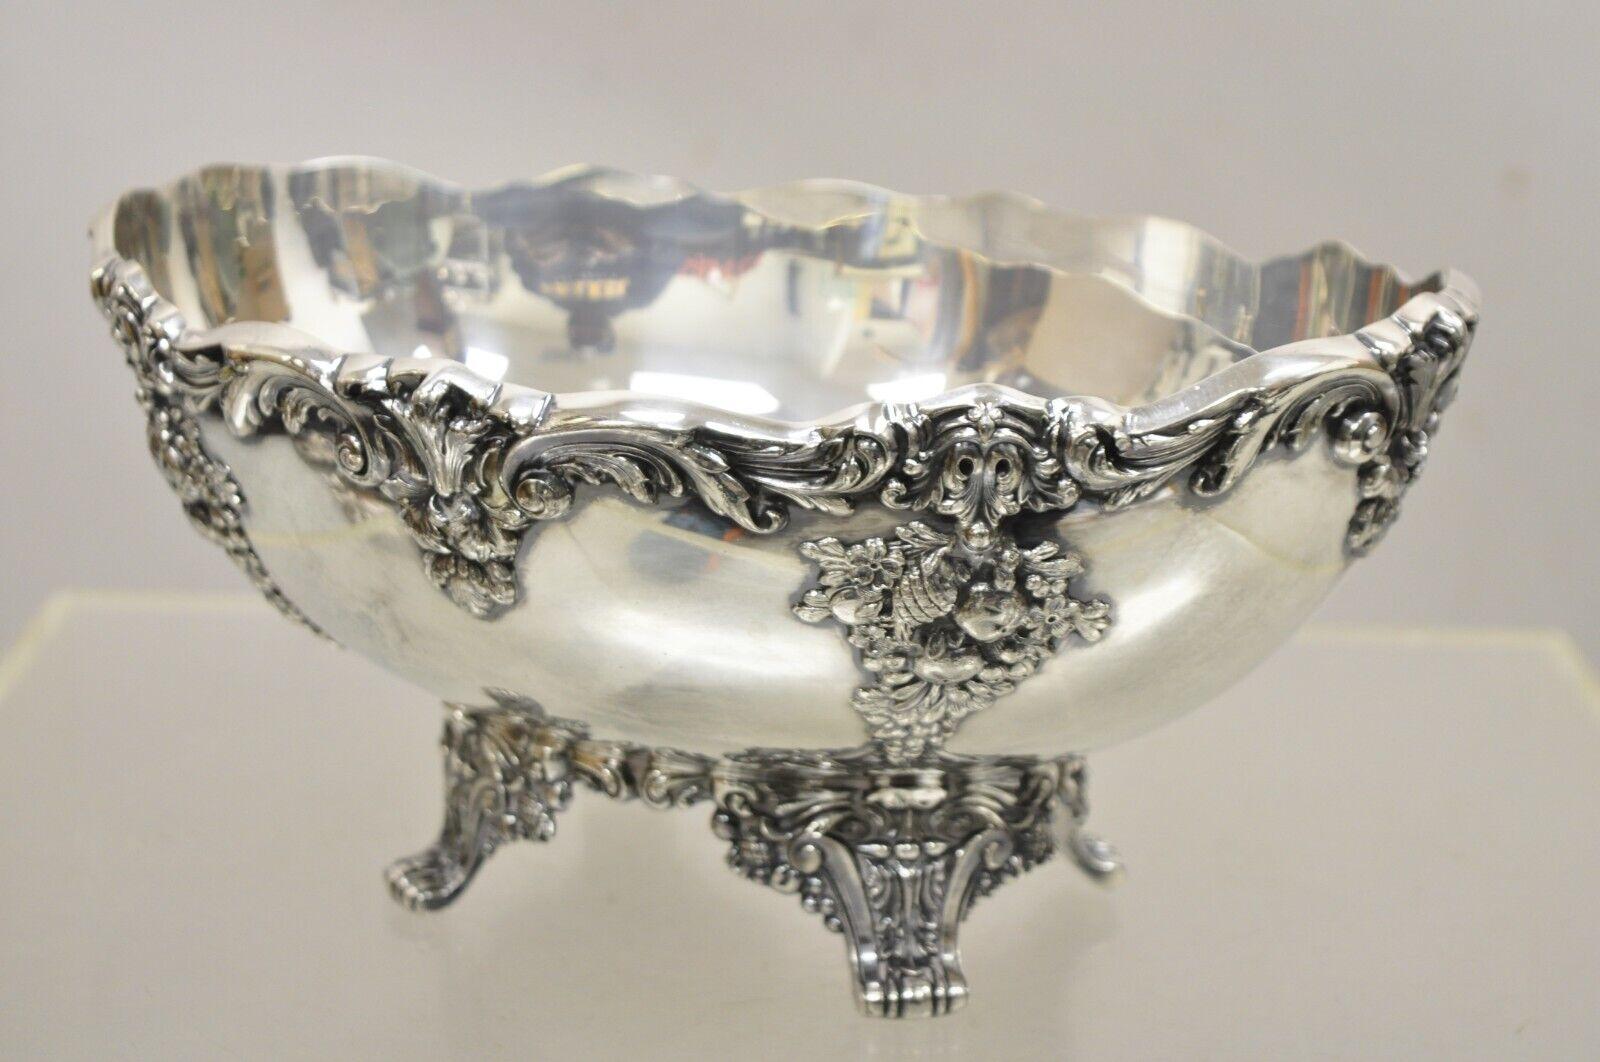 Reed & Barton King Francis 1684 Victorian Silver Plated Oval Footed Serving Bowl 1